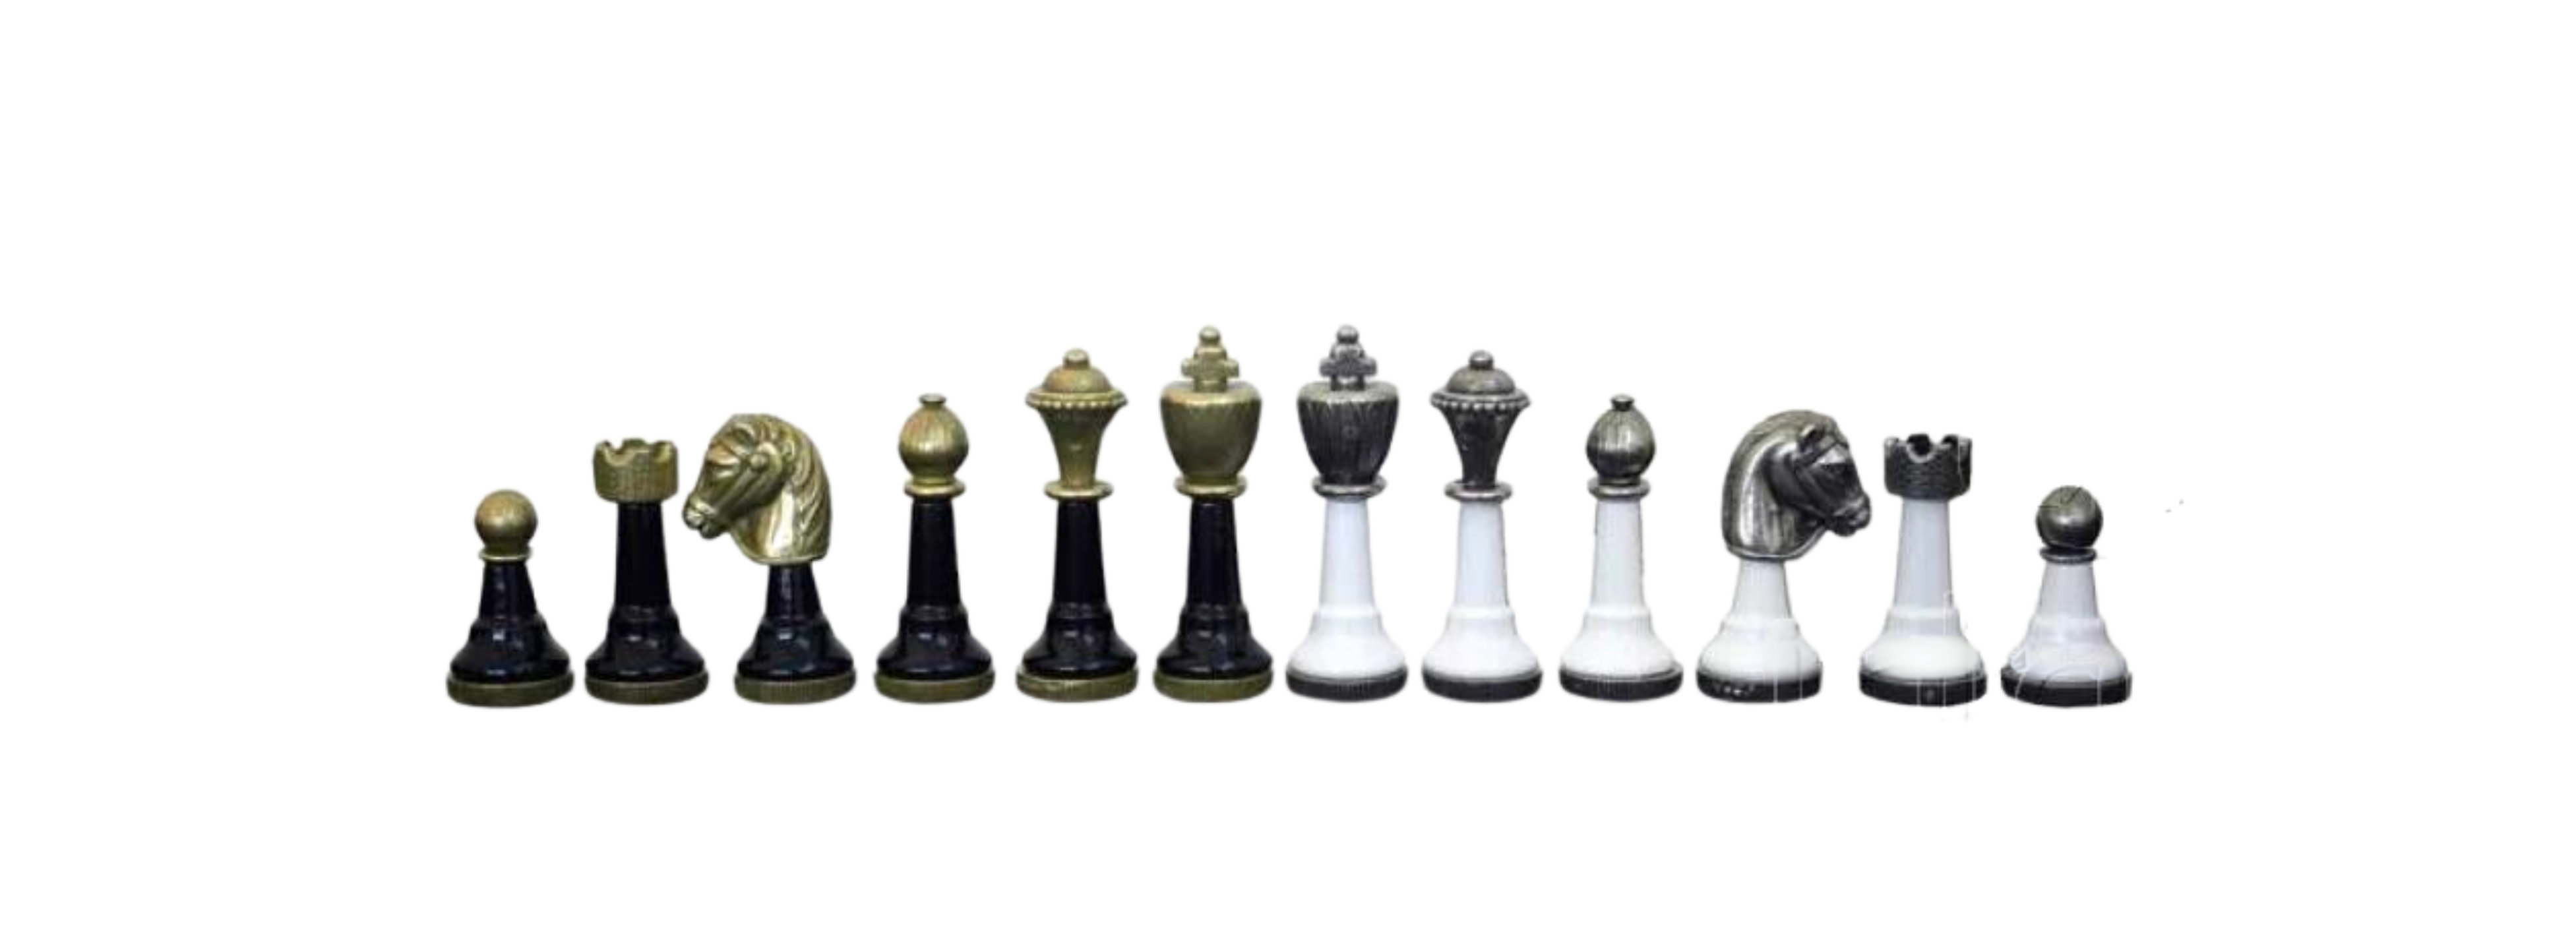 4m-chess-banners-1-.png